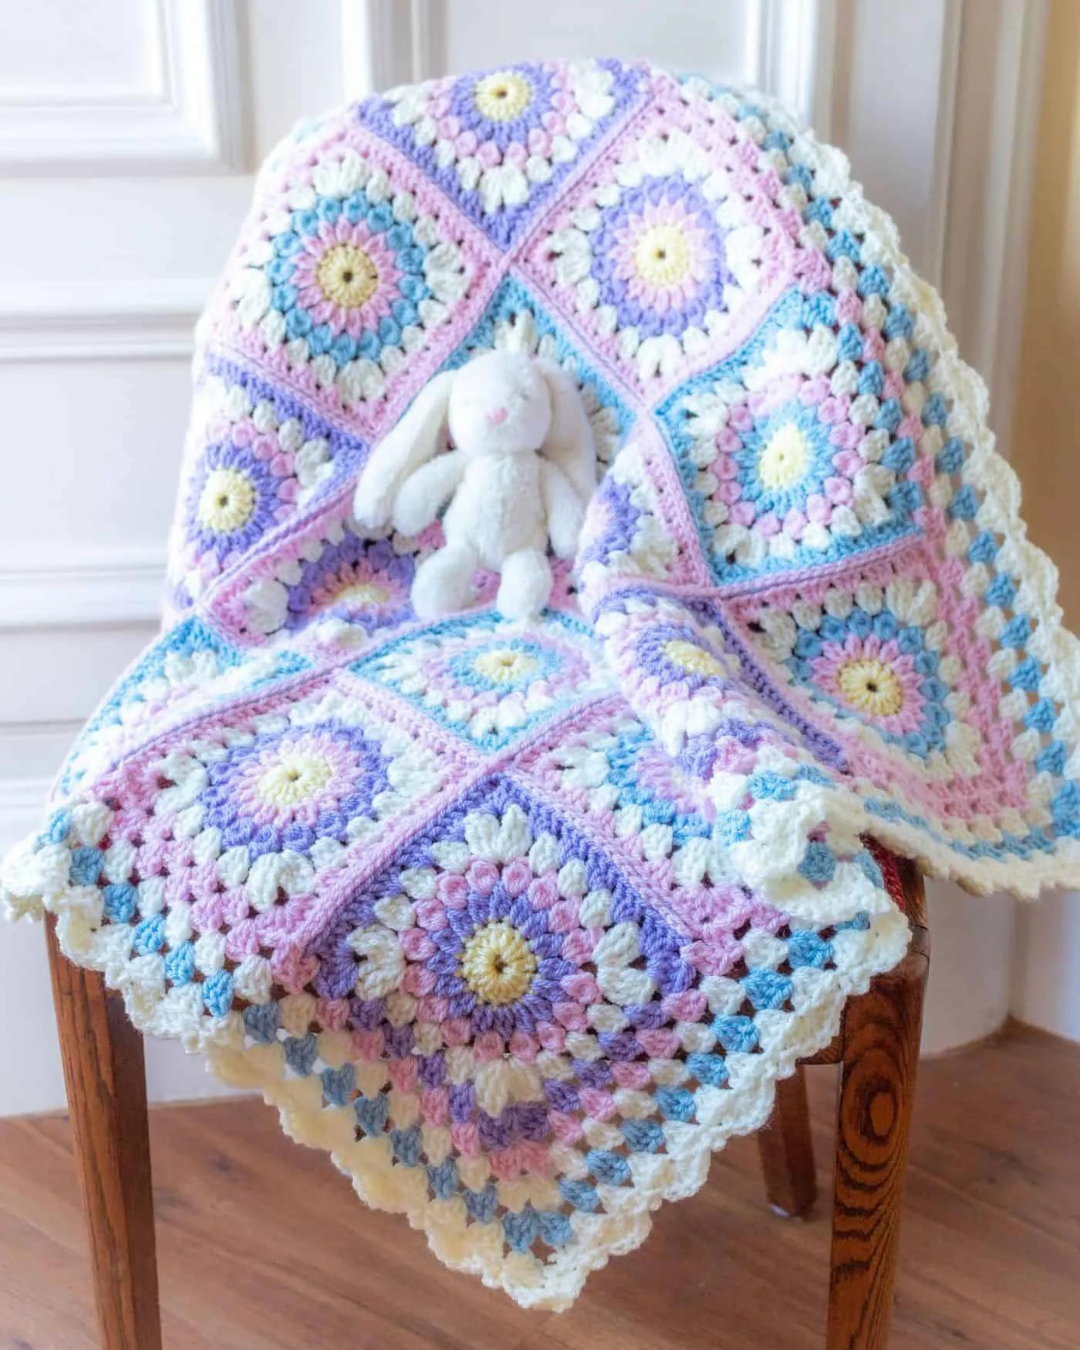 12 Perfect Crochet Baby Blankets for Your Next Baby Shower! - Crochet ...